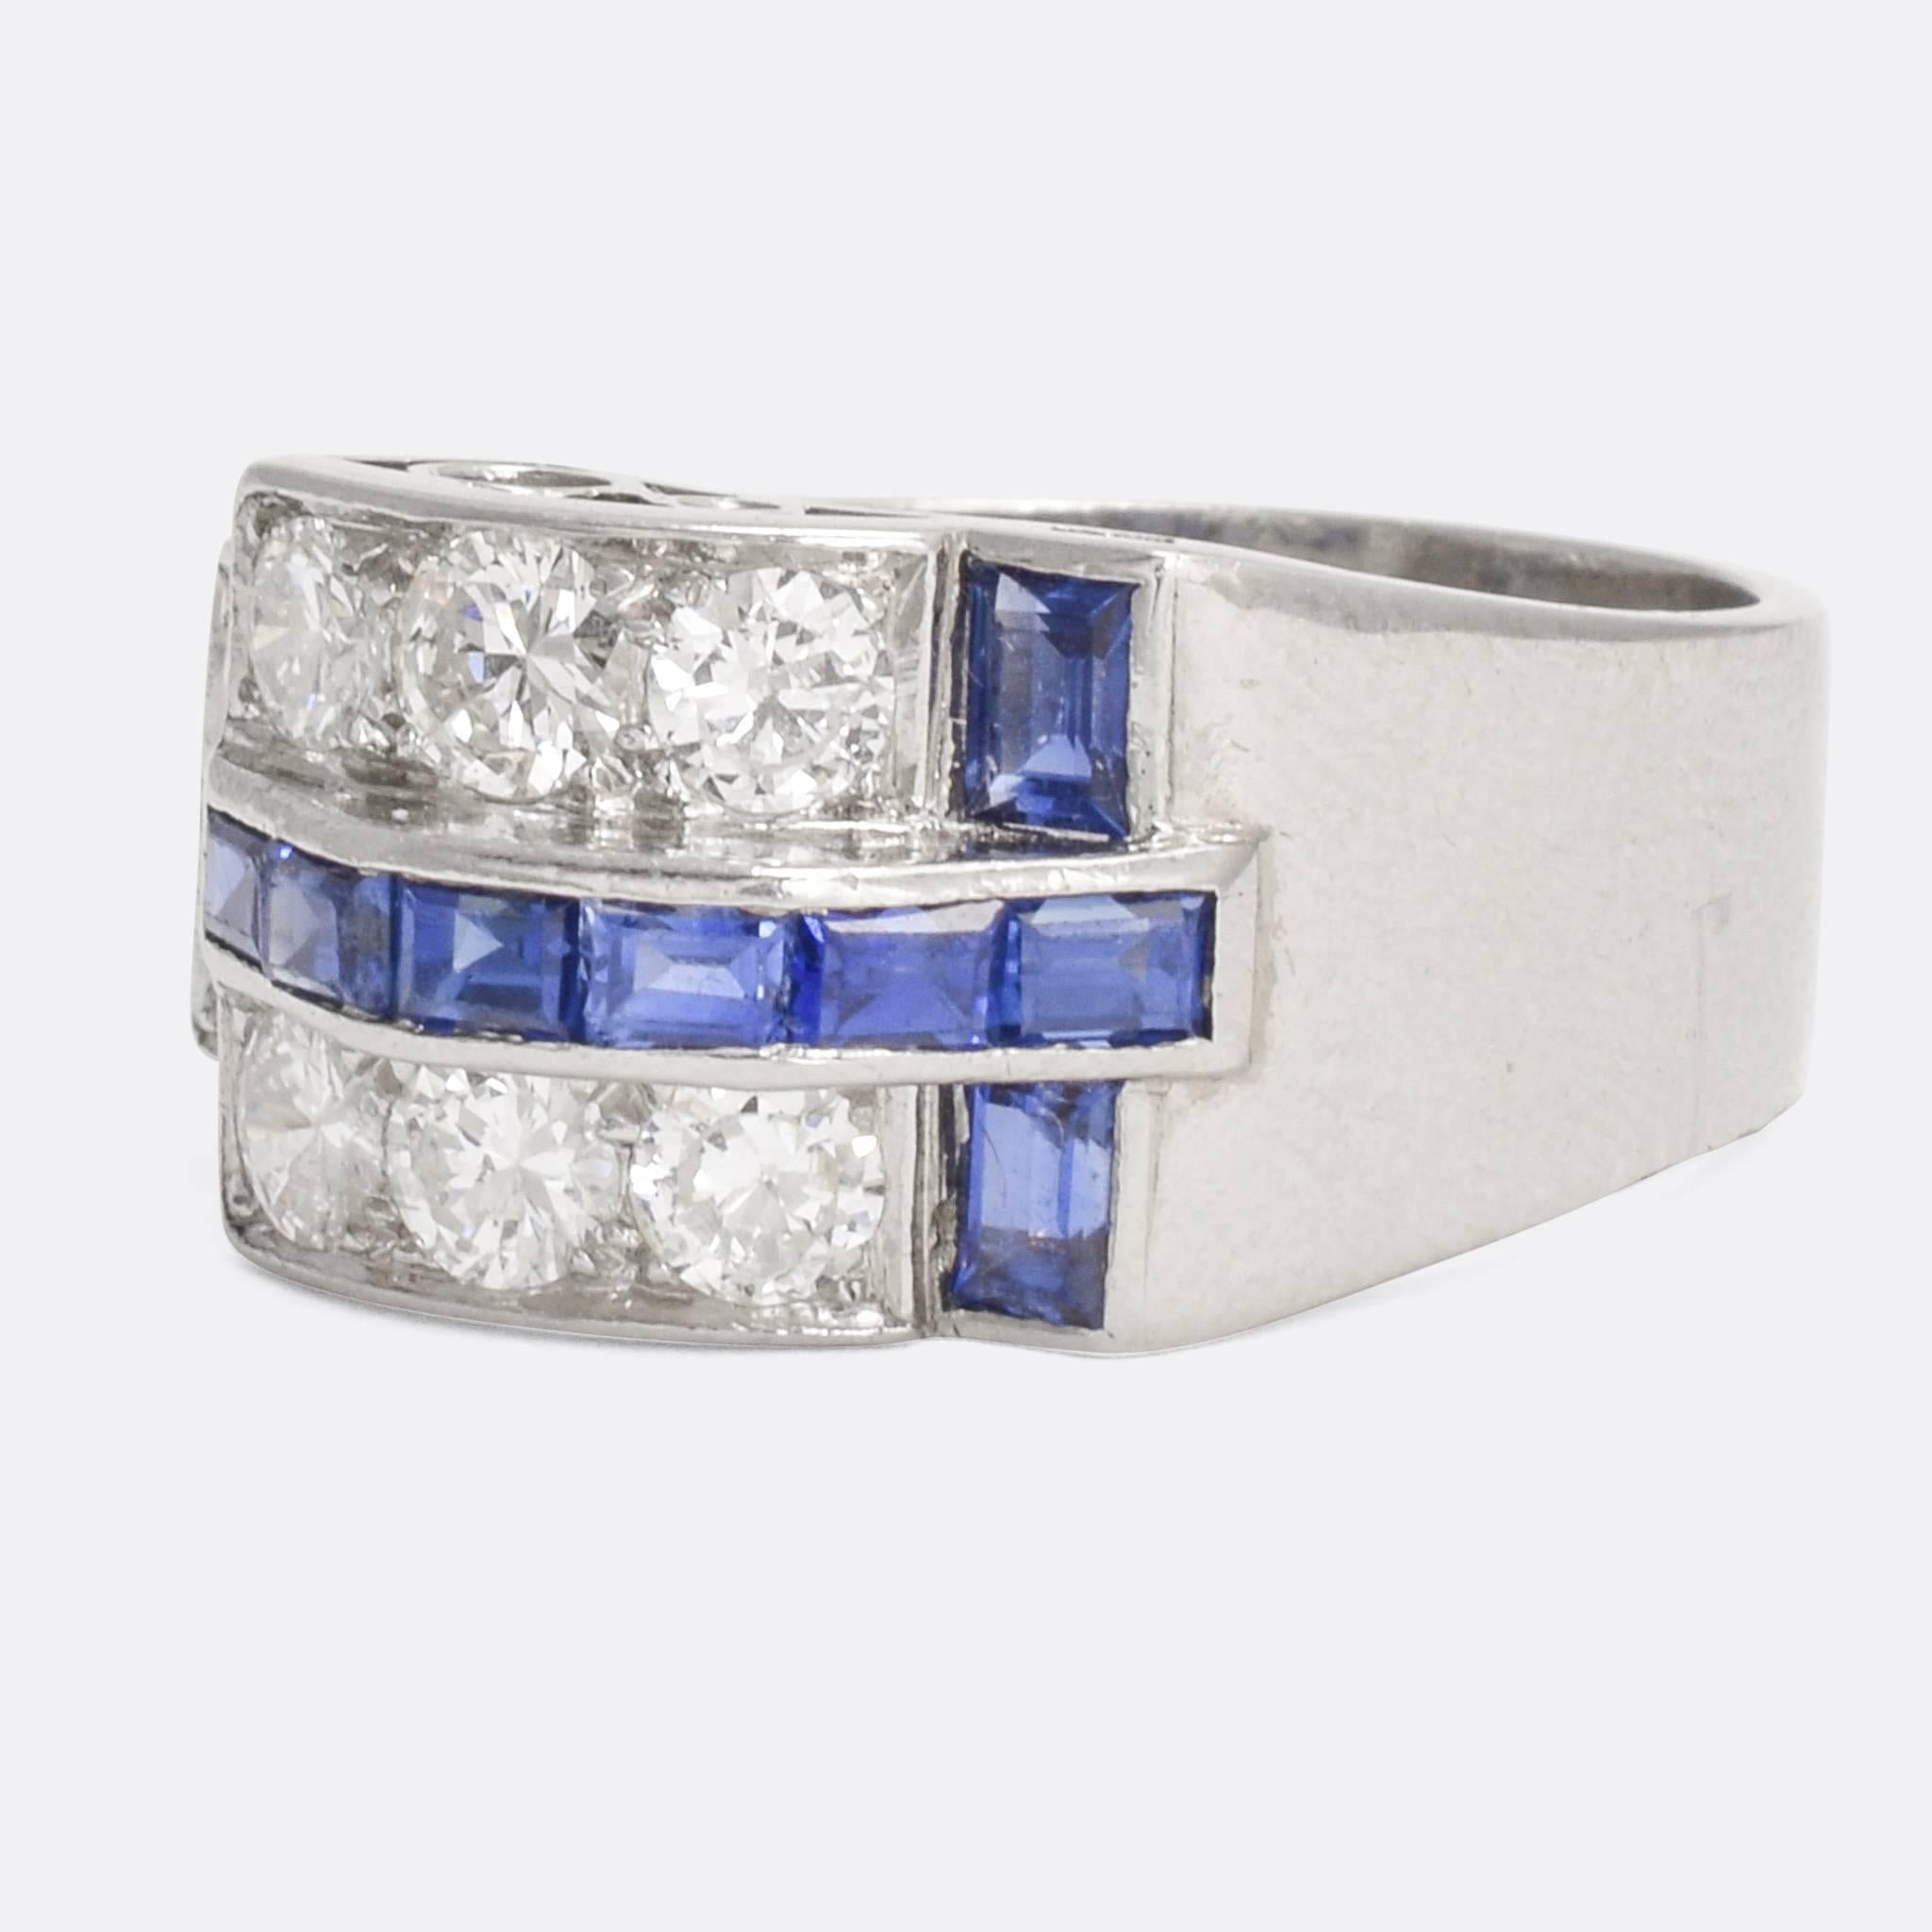 This cool Retro era ring was made in the 1940s. It's big and bold with a stong modernist vibe; a mid-20th Century take on the buckle ring, set with vibrant blue sapphires and brilliant cut diamonds. The gallery features fine scrolled openwork,